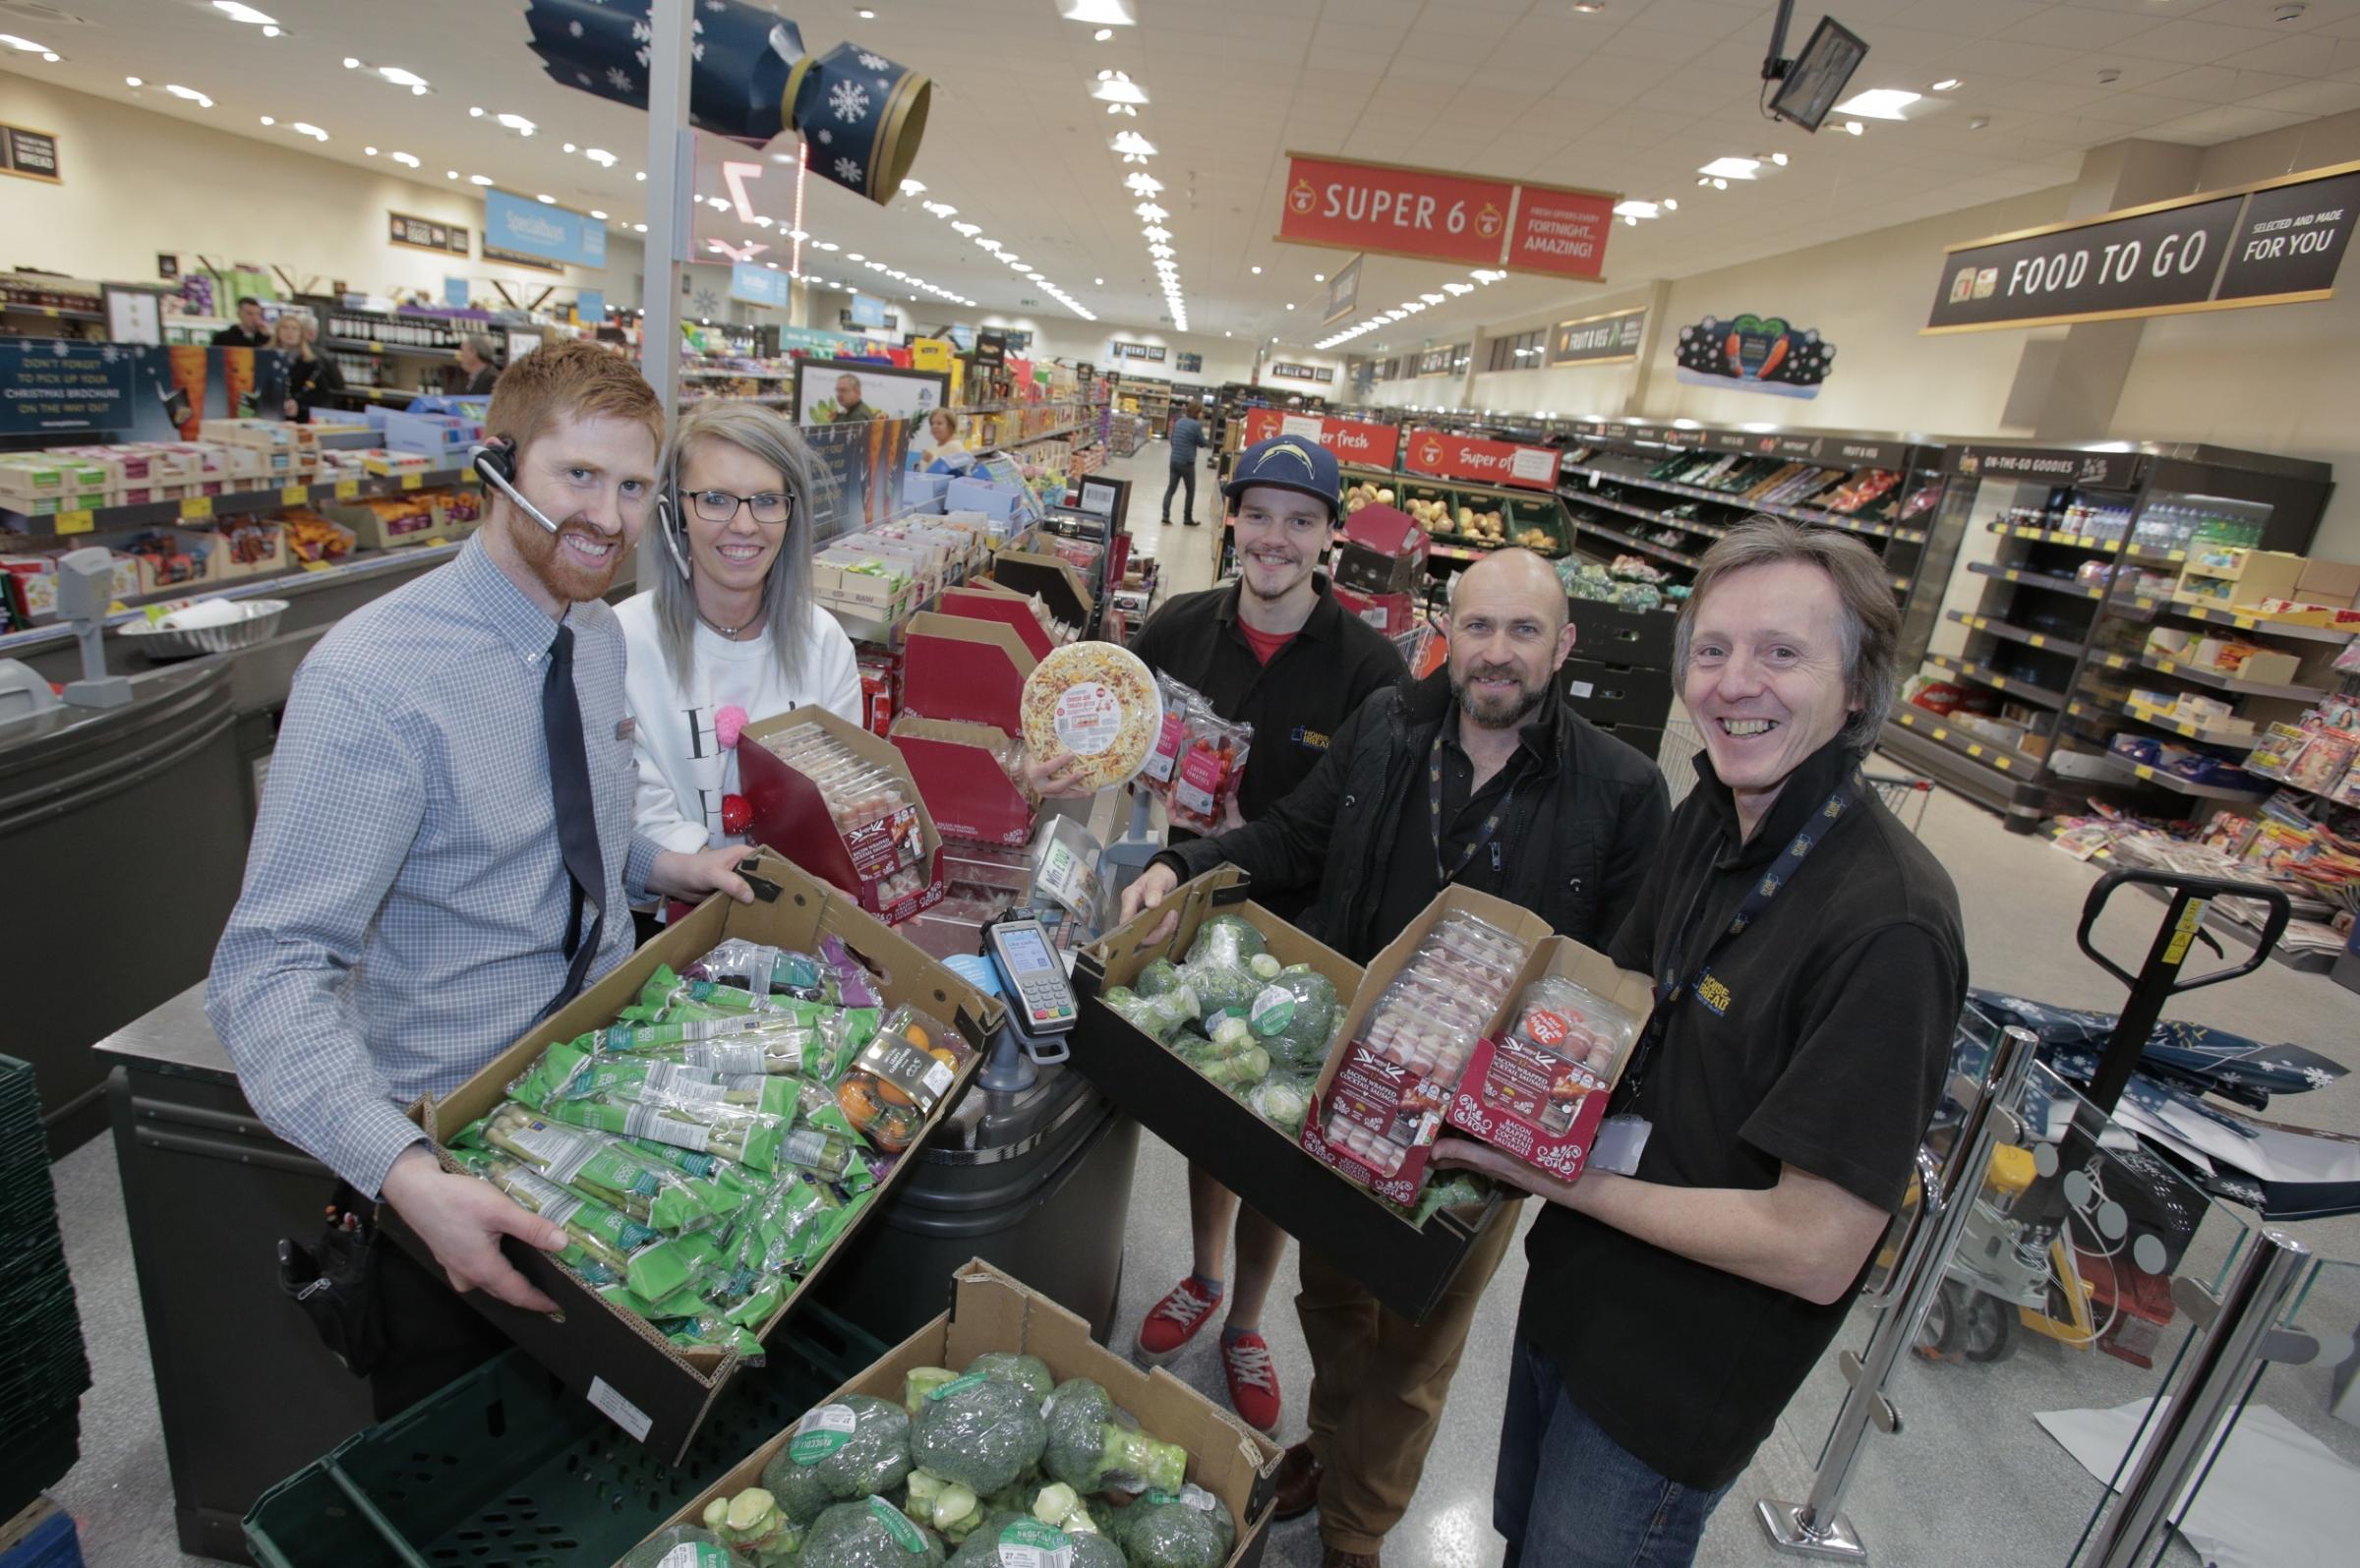 Aldi pledges to reduce food waste with charity partnership scheme